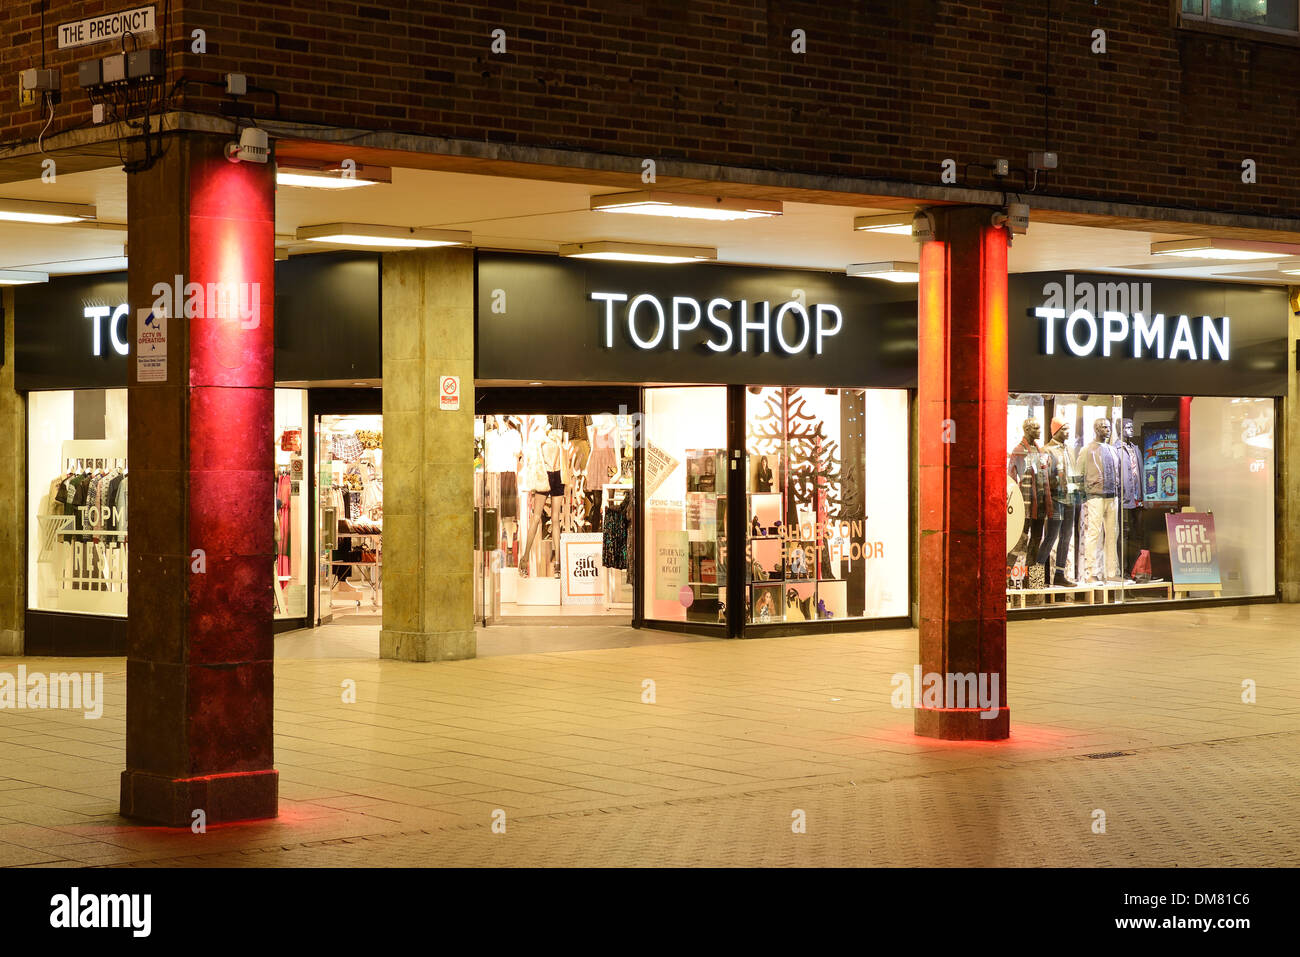 Exterior of Topshop and Topman shops in Coventry city centre Stock Photo -  Alamy